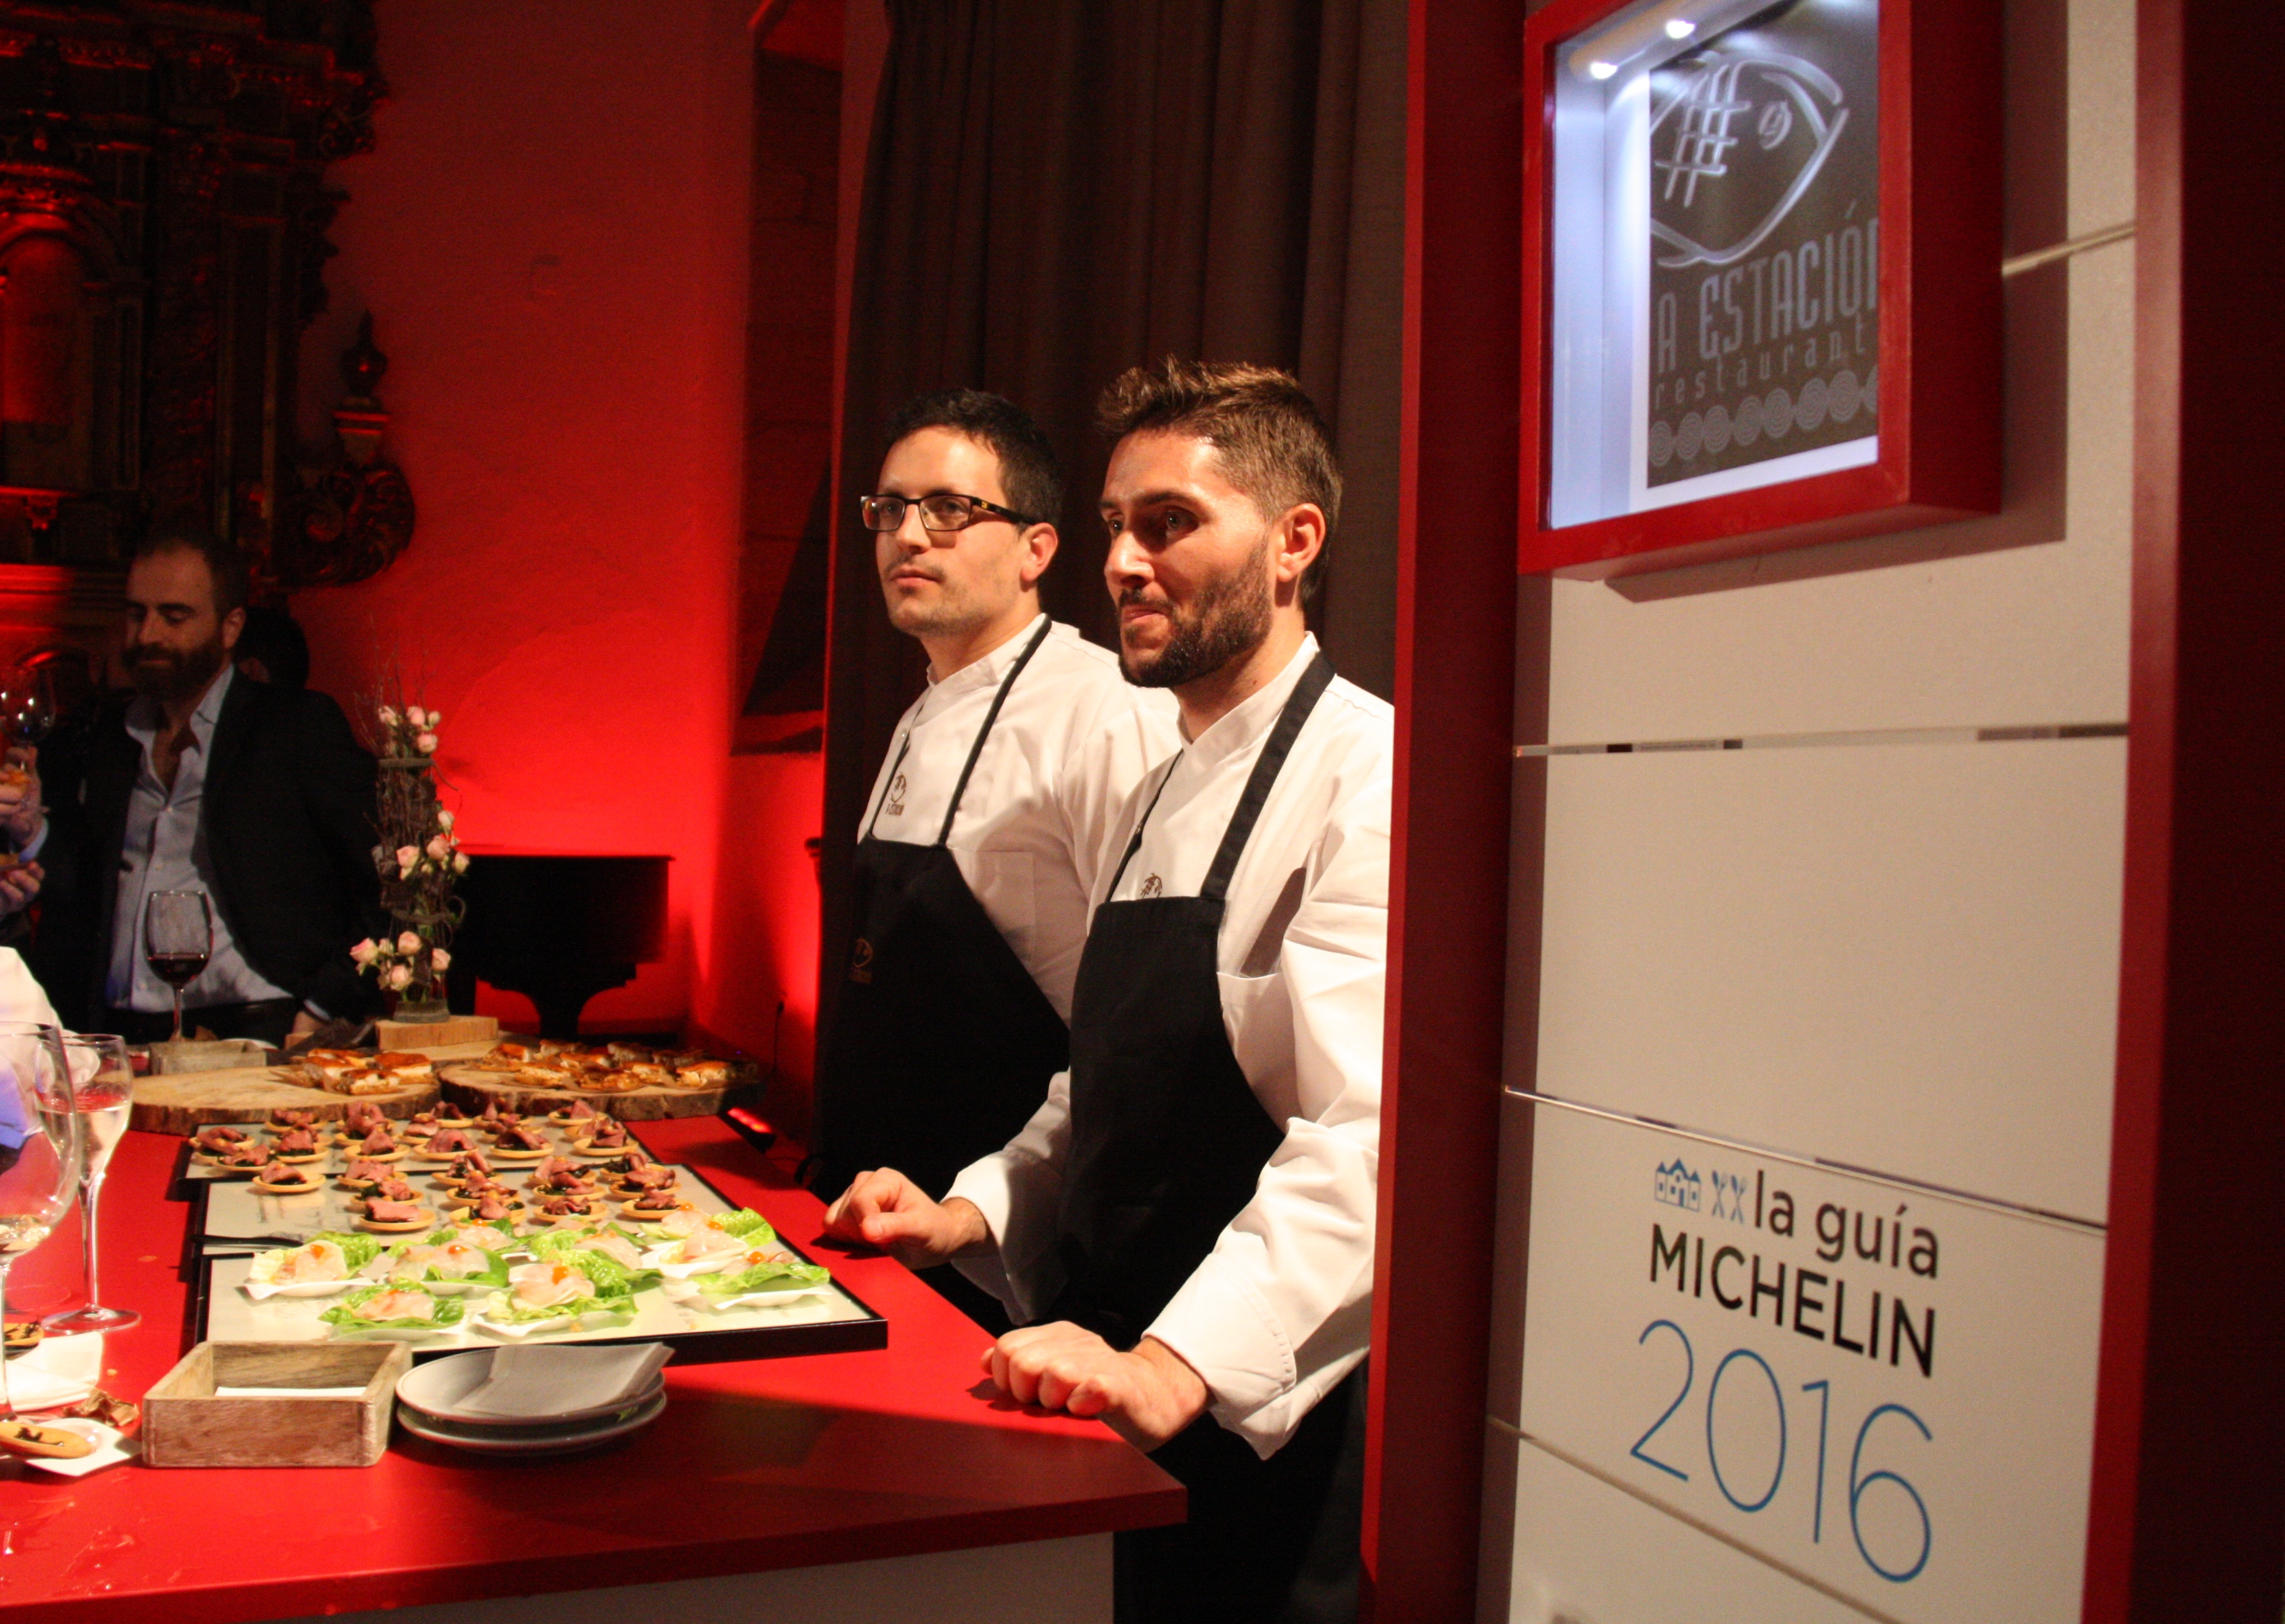 Spain and Portugal’s Michelin Guide 2016 presentation in Santiago de Compostela (by ACN)